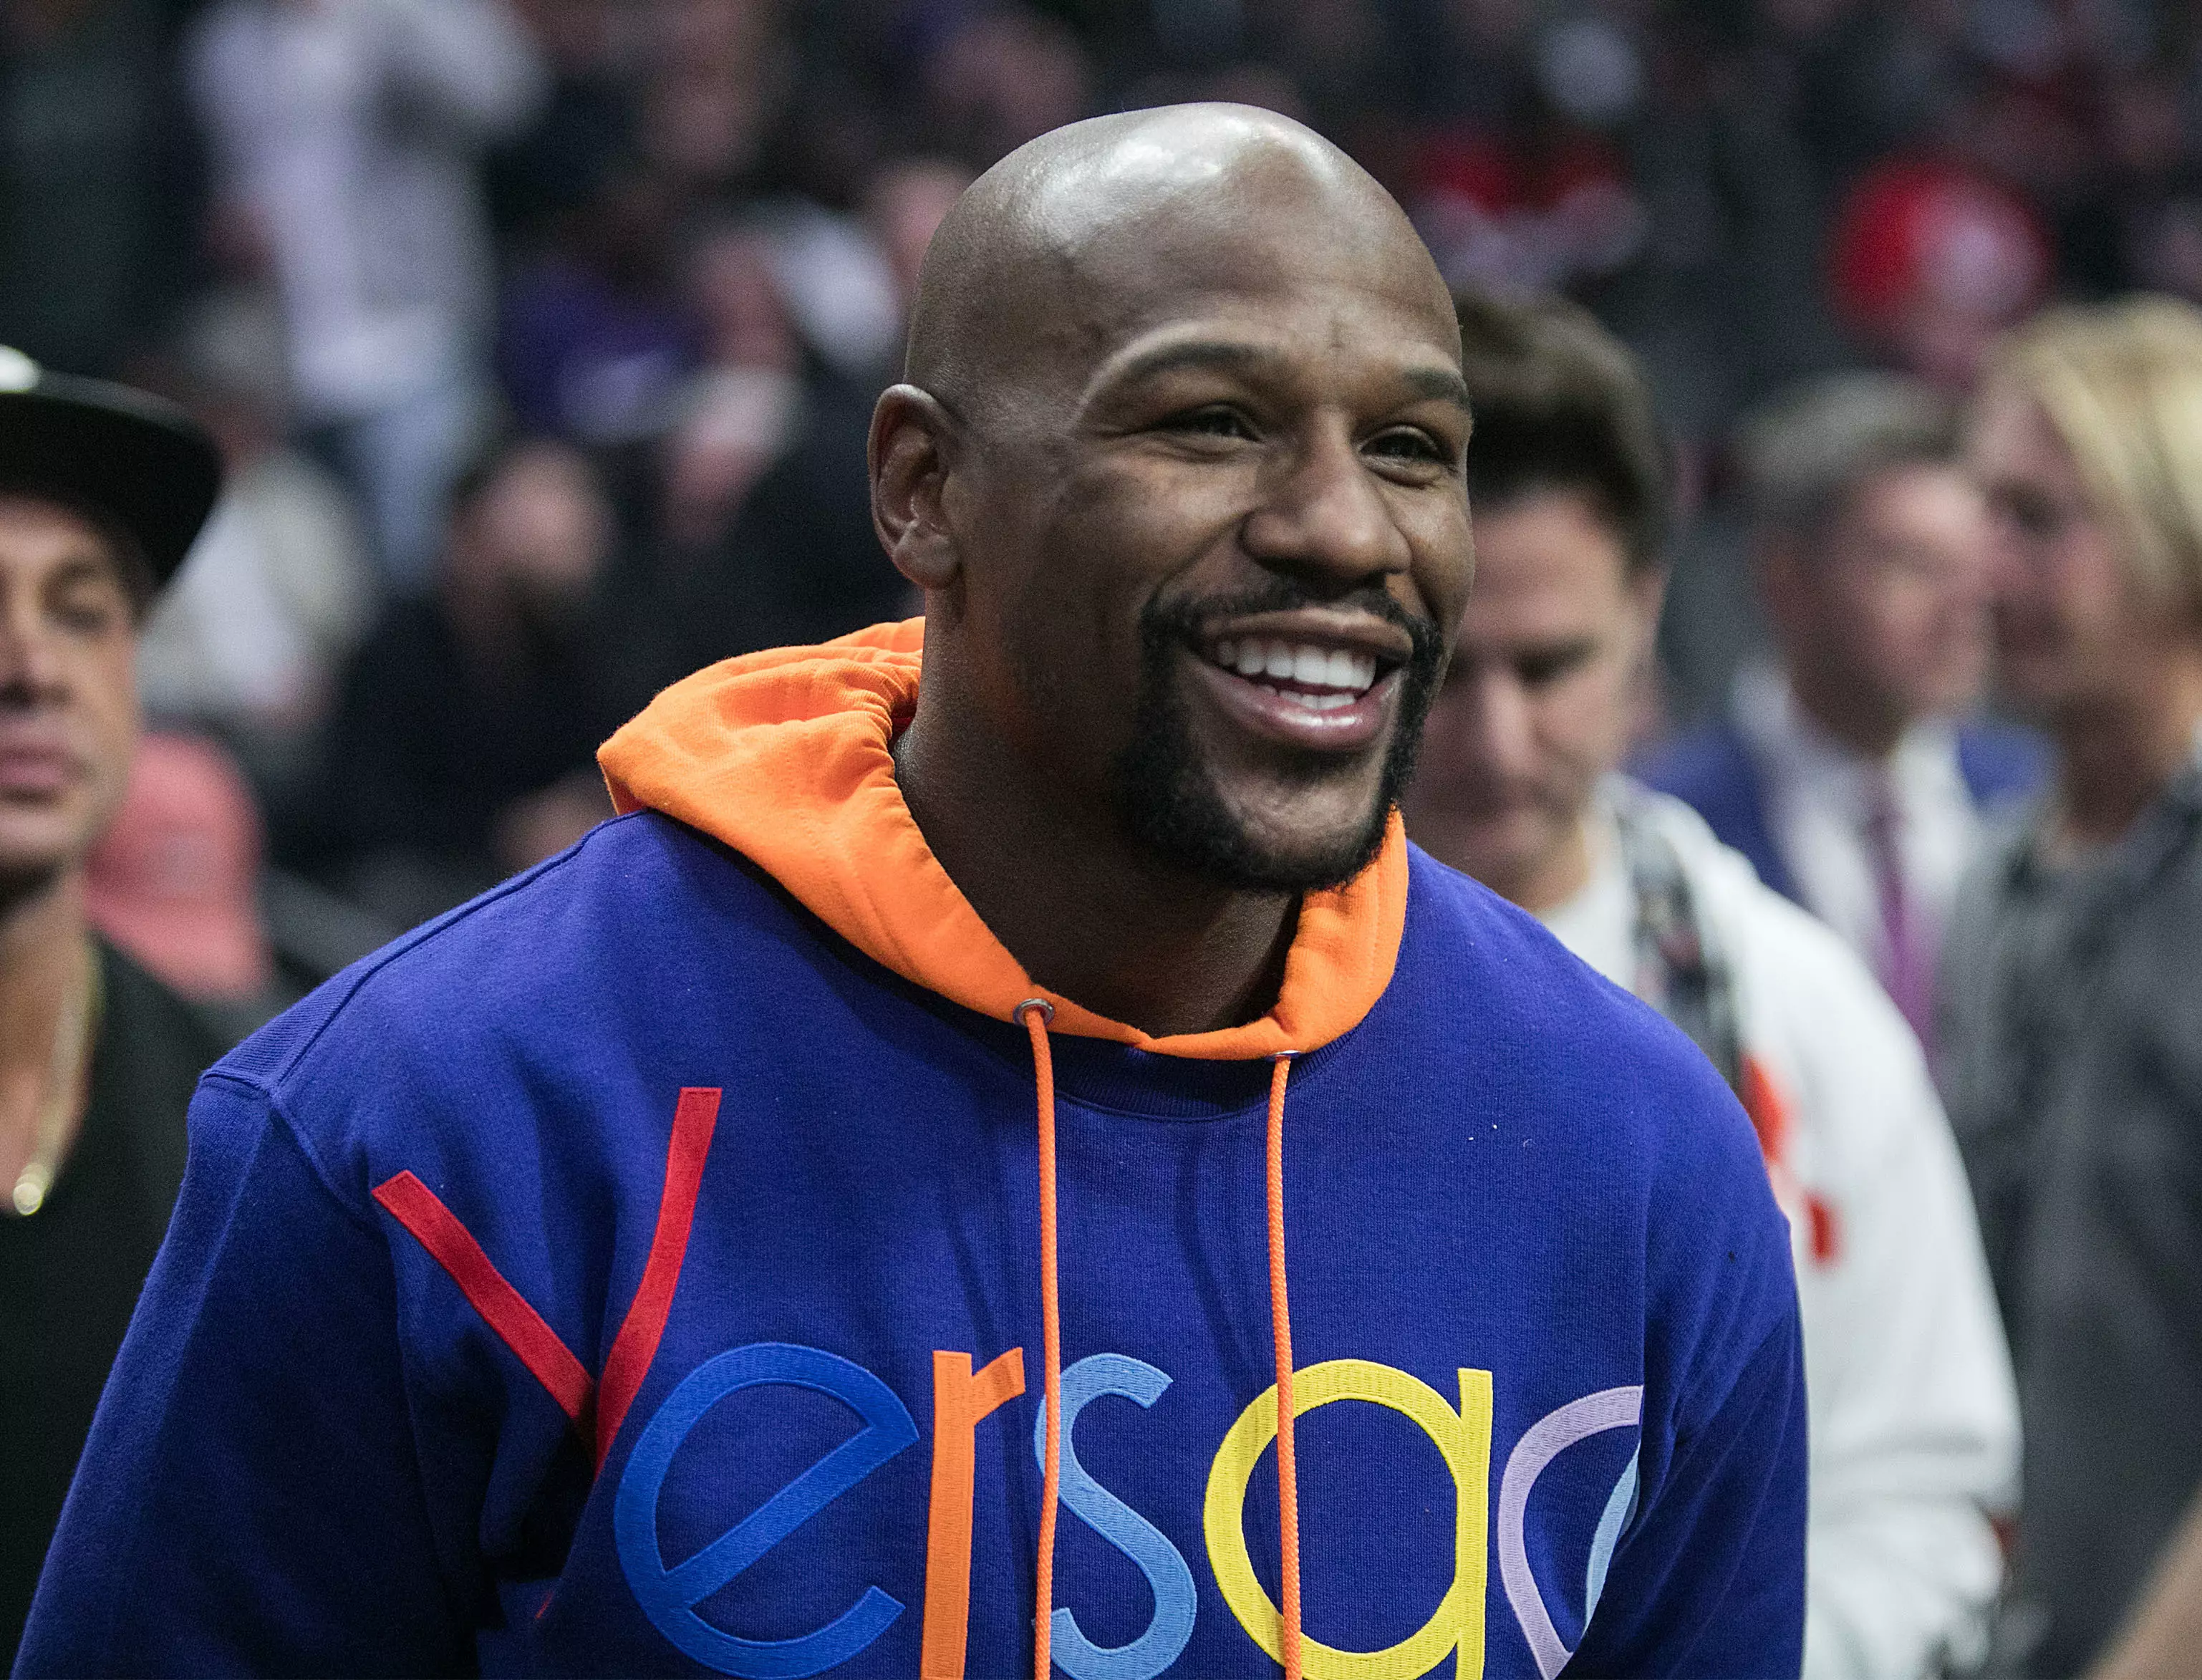 Floyd Mayweather threw a few social media jabs at 50 Cent this weekend